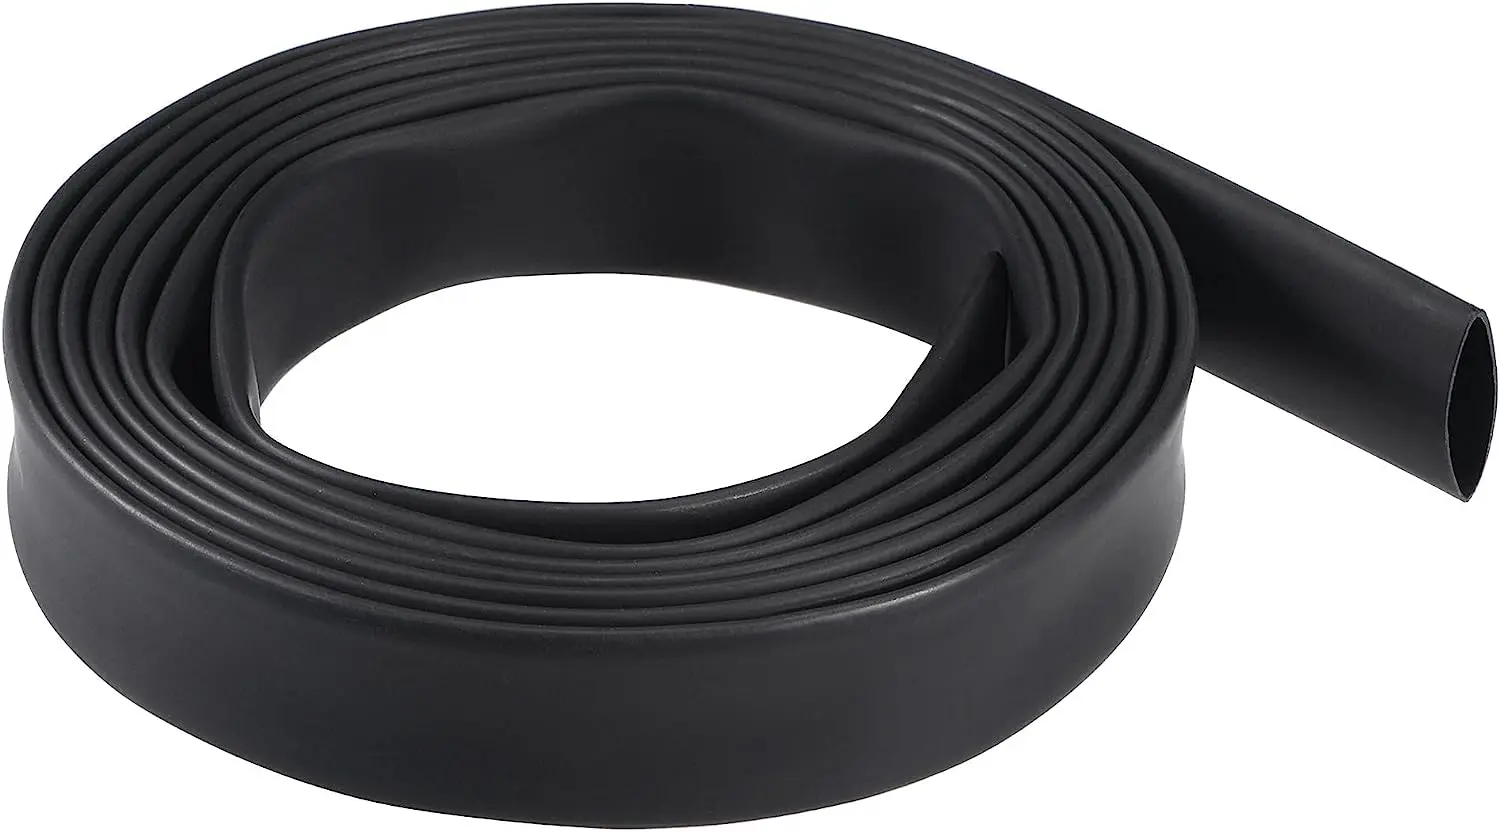 

Keszoox Heat Shrink Tubing 3:1 Cable Sleeve Wrap 22mm(7/8-inch) Flat 12.7mm(1/2-inch) Dia 6.6ft Black